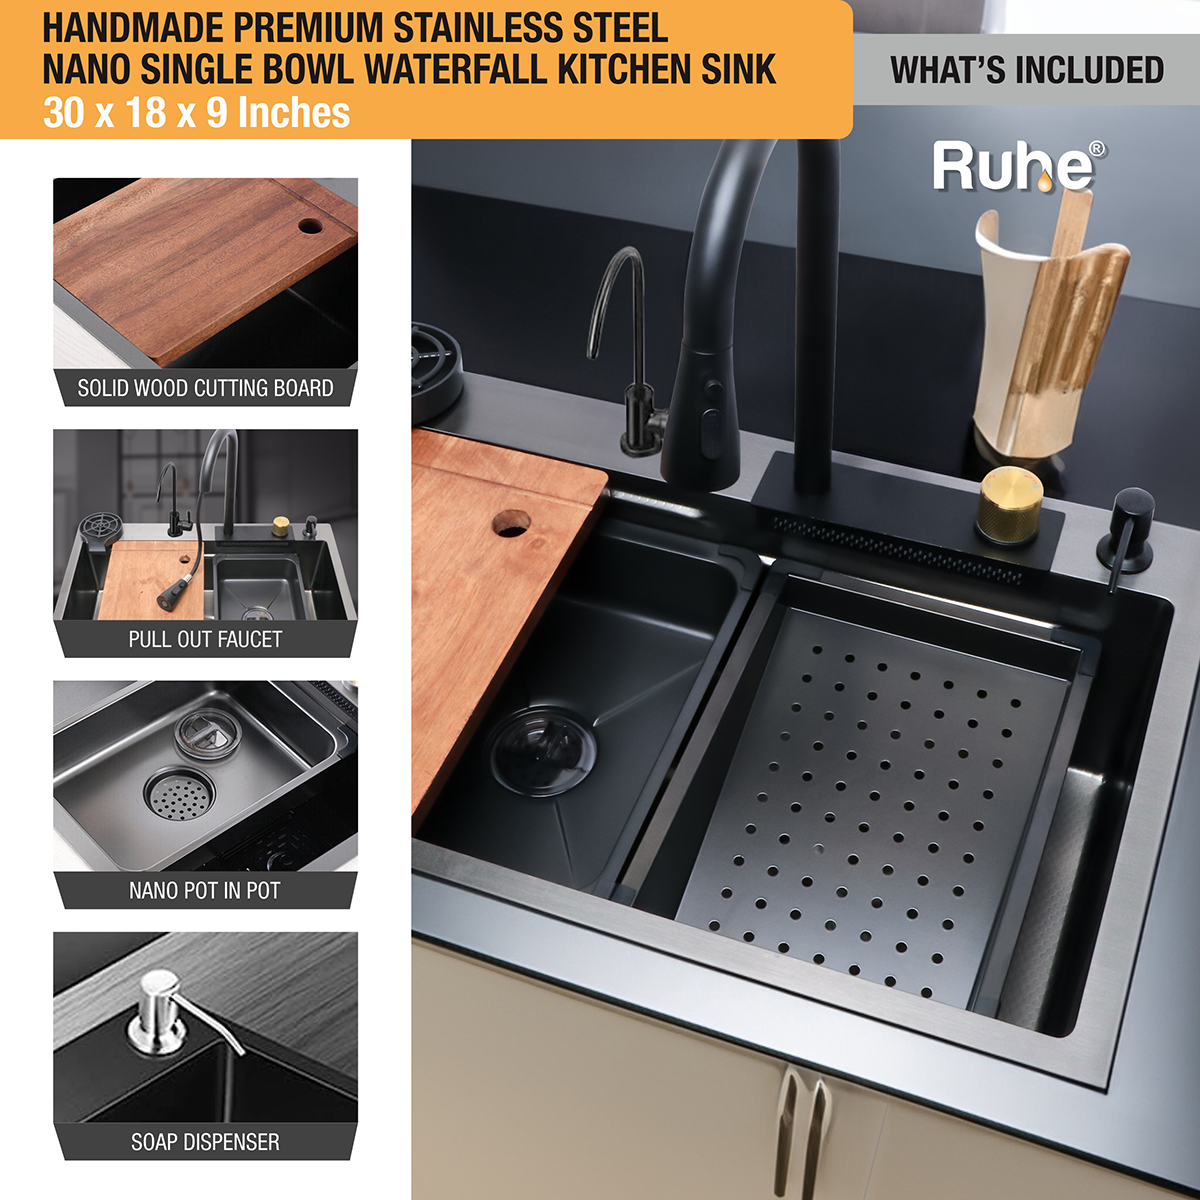  Handmade Premium Nano Kitchen Sink with Integrated Waterfall, Pull-Out & RO Faucet (30 x 18 x 9 Inches) 4